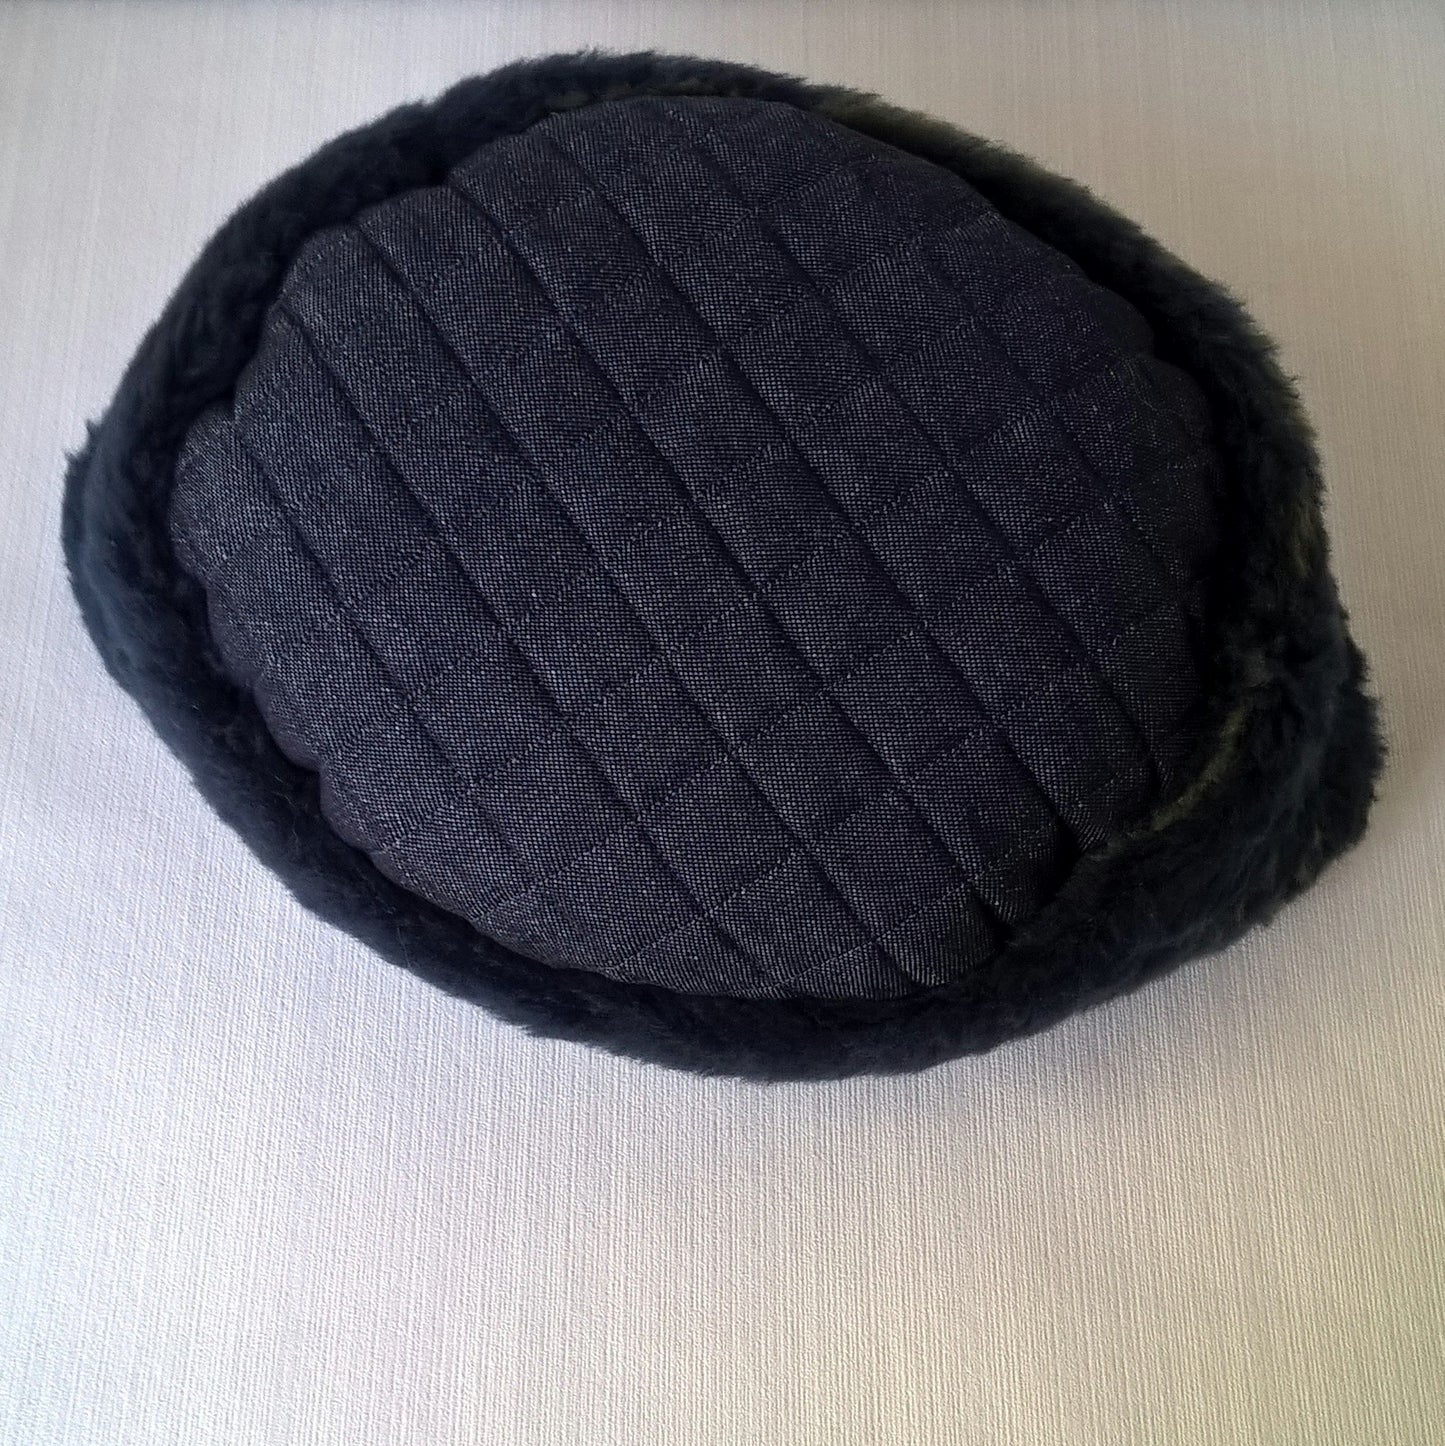 This blue wool fur hat has a denim quilted tip